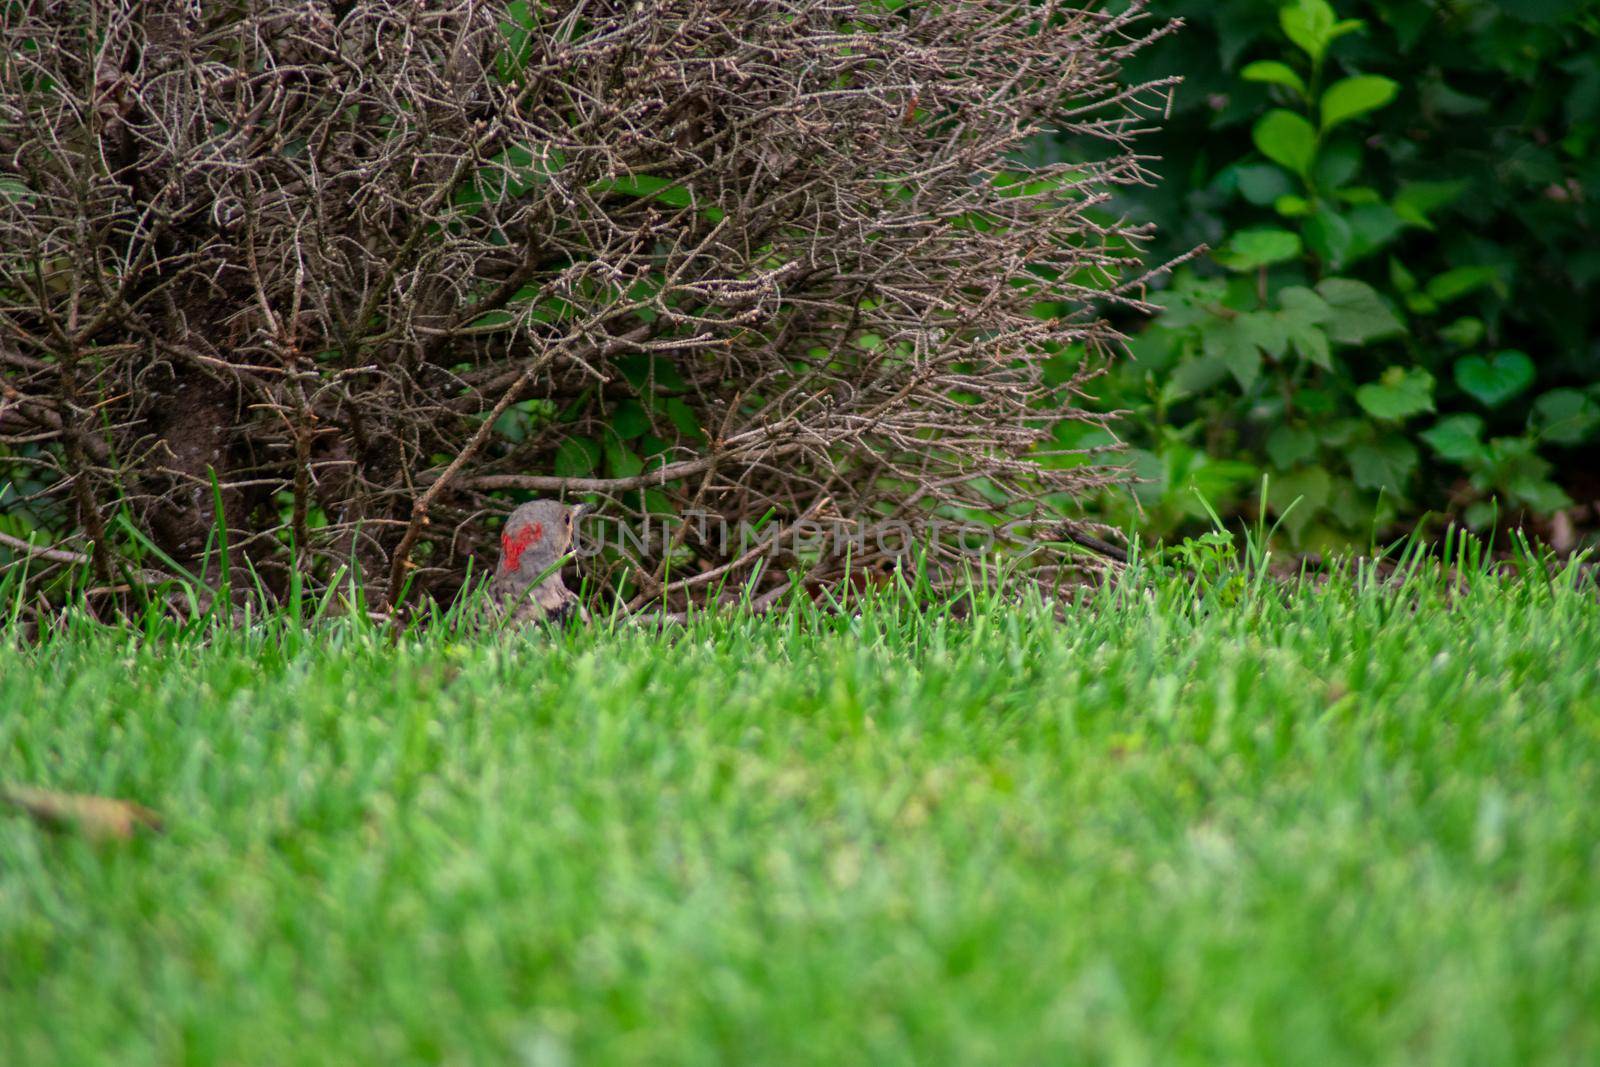 A Northern Flicker on the ground In Front of a Dead Bush